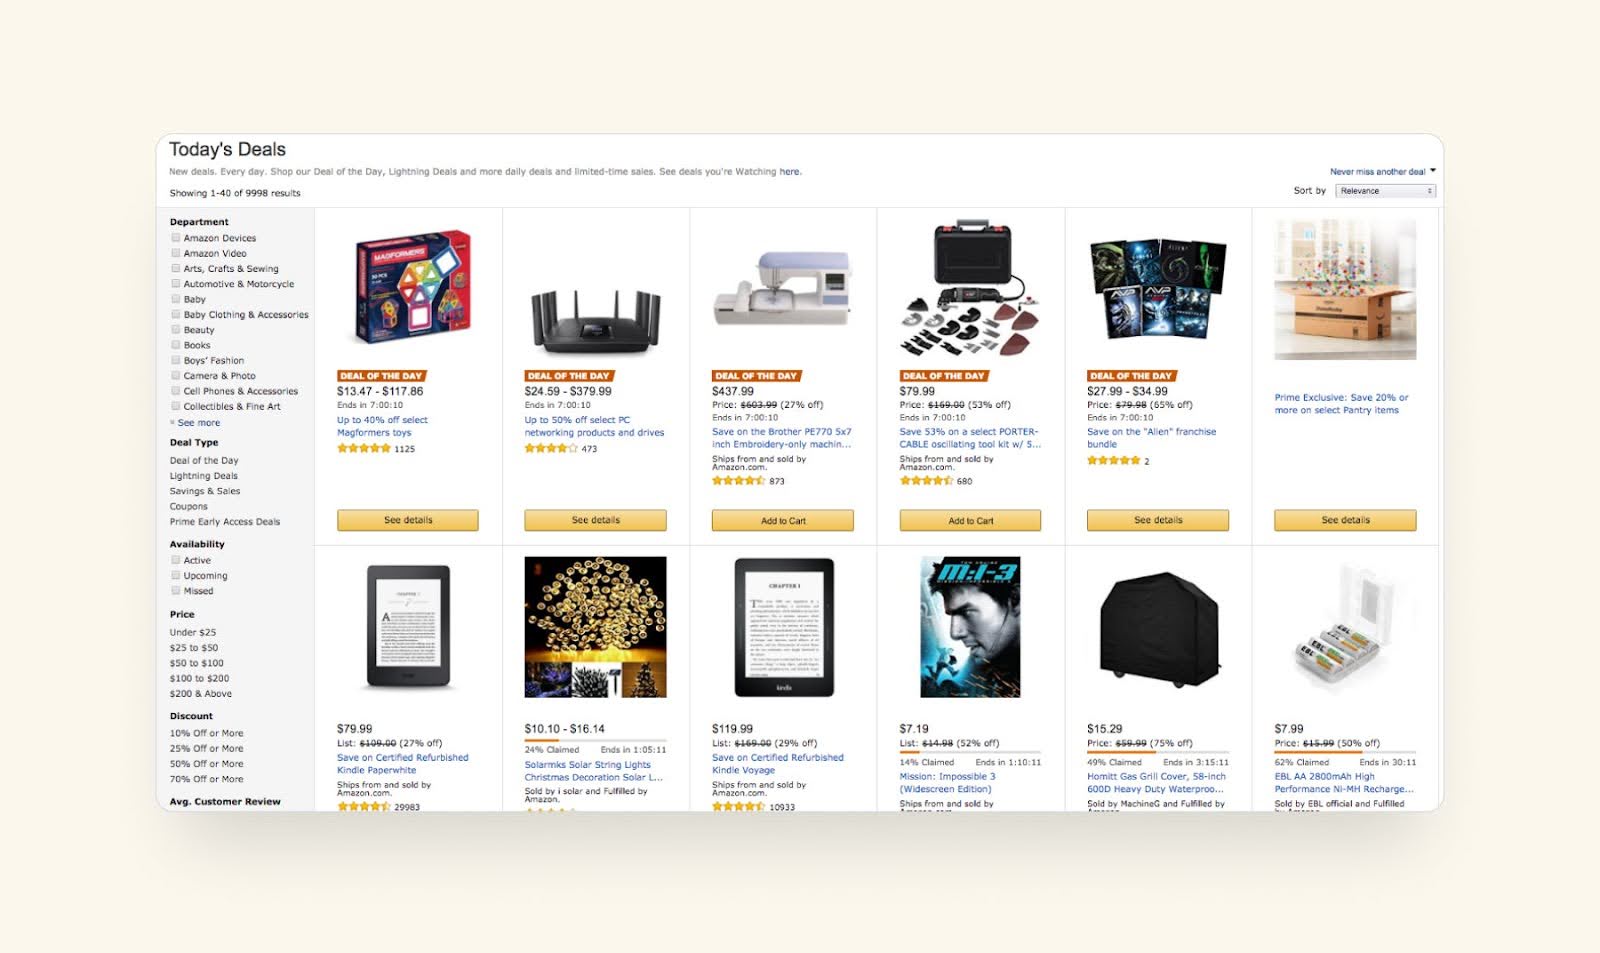 Screenshot of Amazon Today's Deals featuring various products running deals.